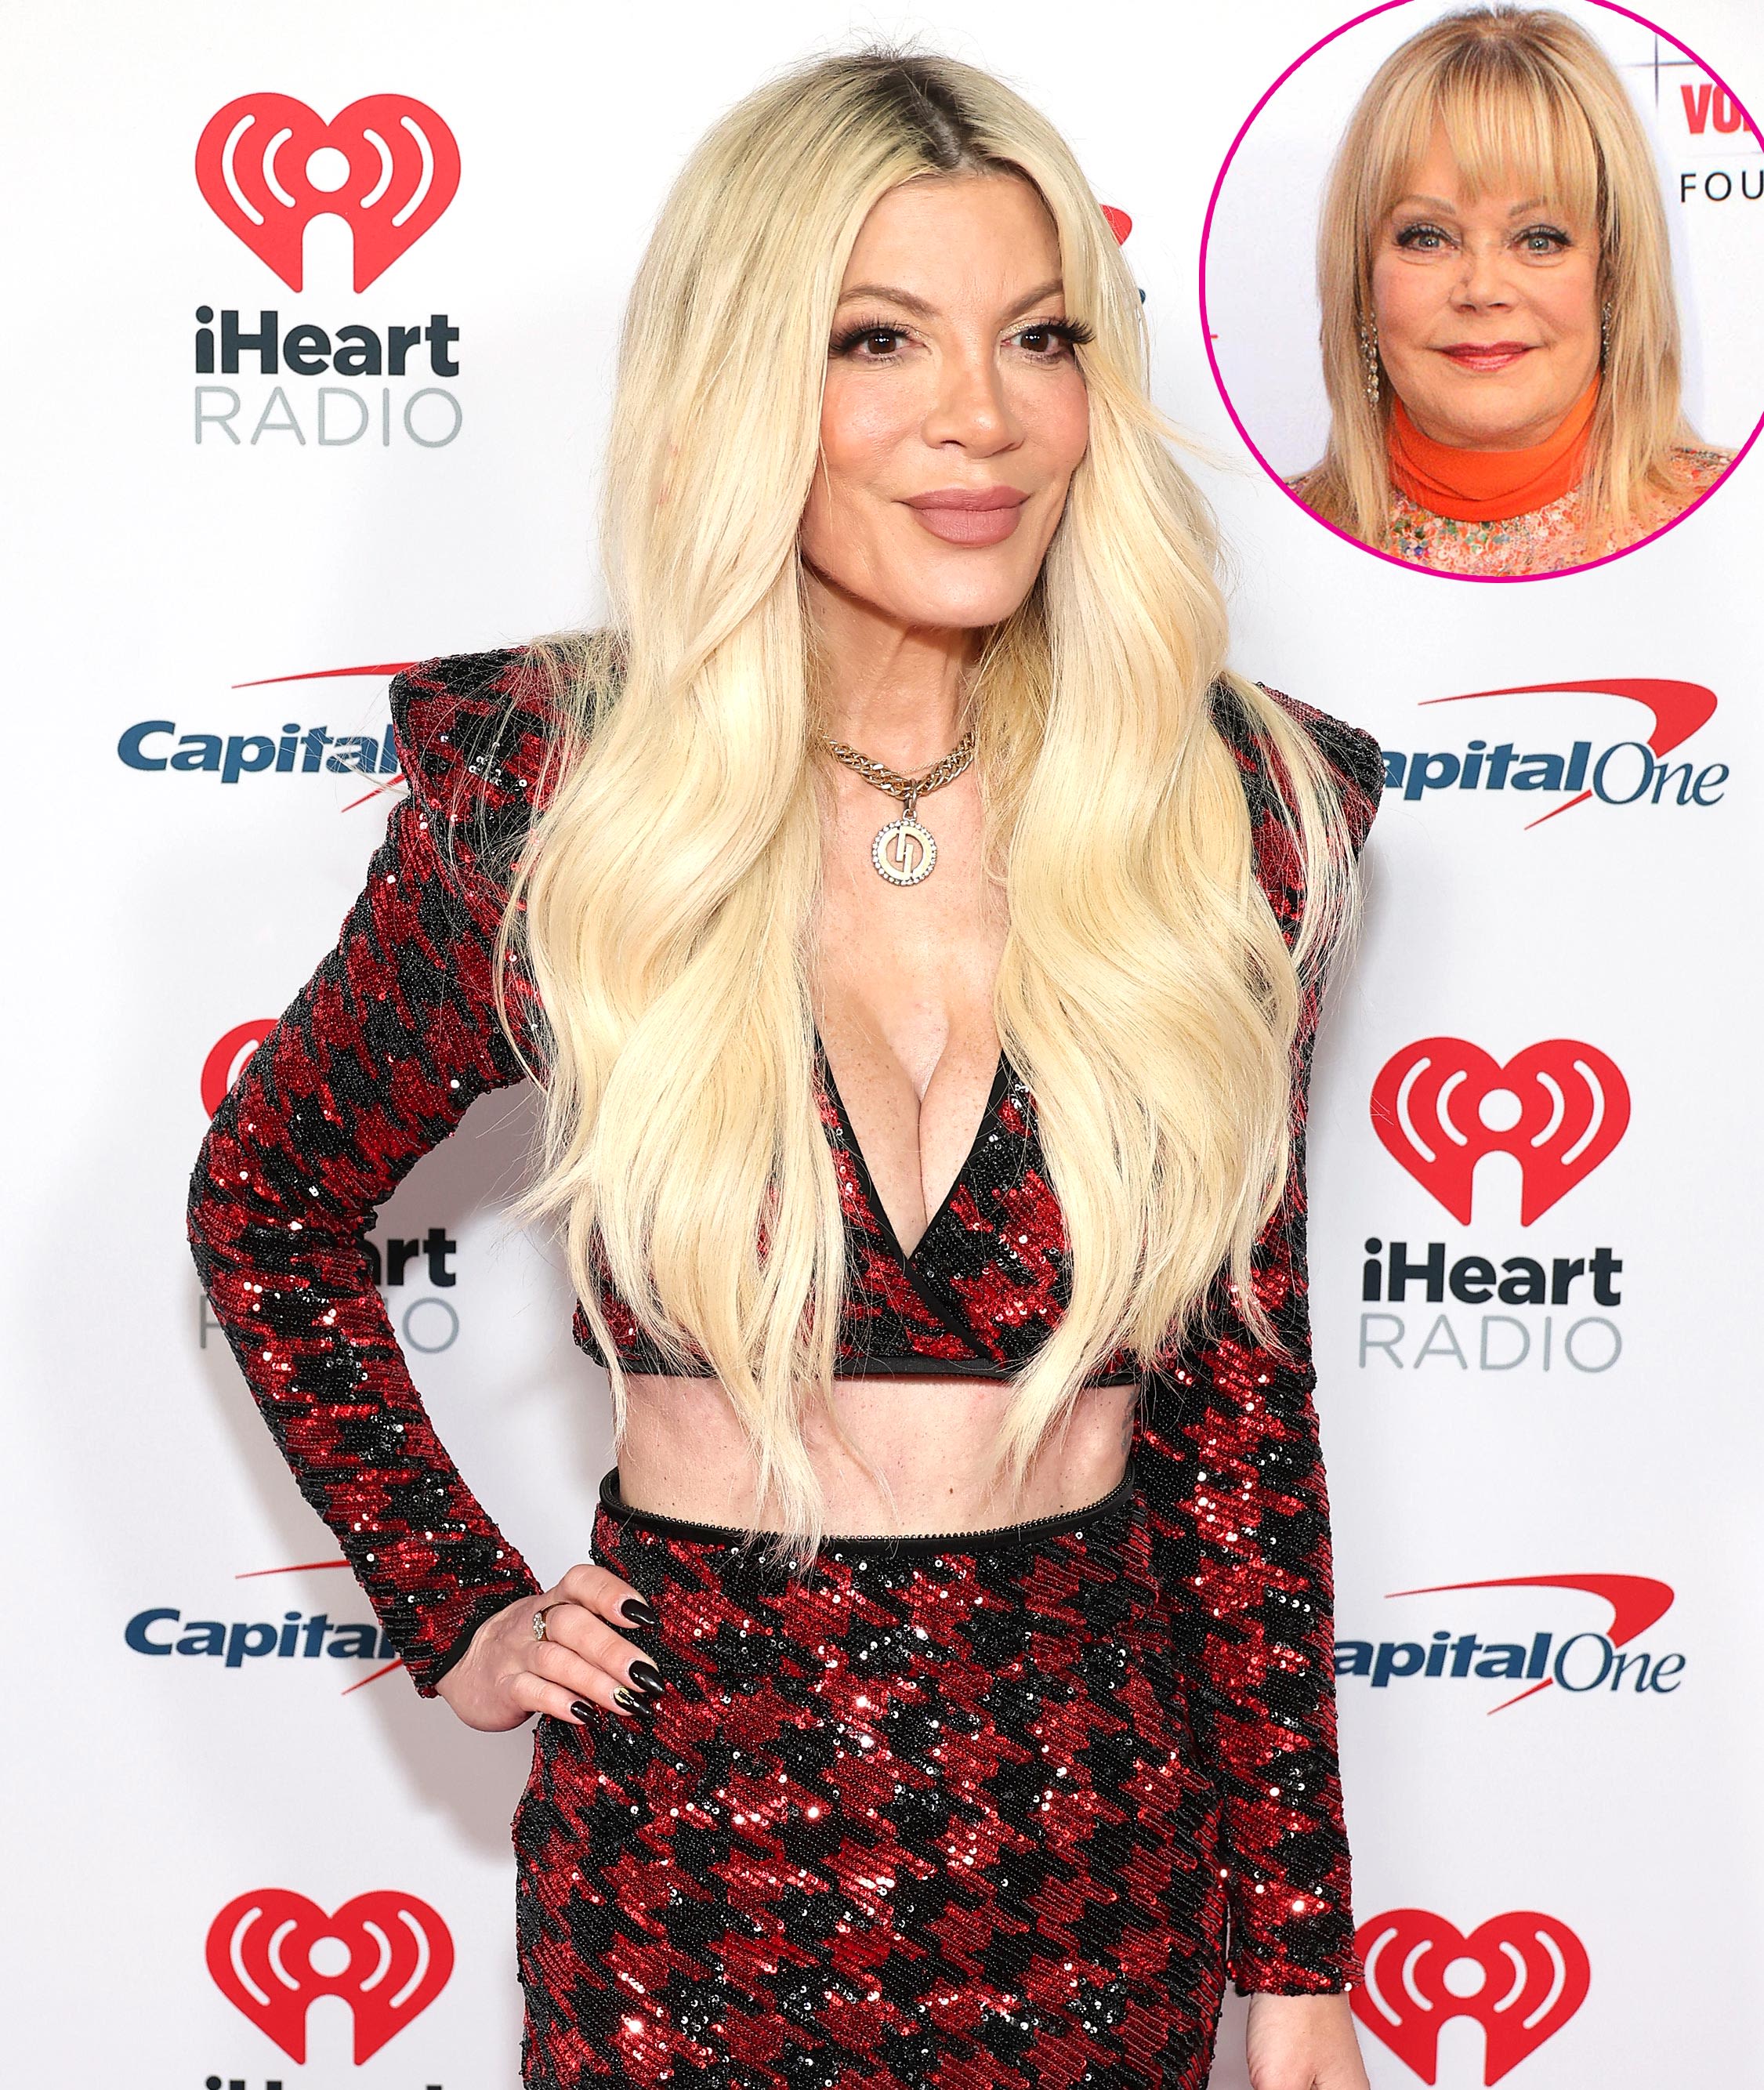 Tori Spelling Recalls Mom Giving Her ‘Archaic’ Padded Belt After Getting 1st Period at Age 14